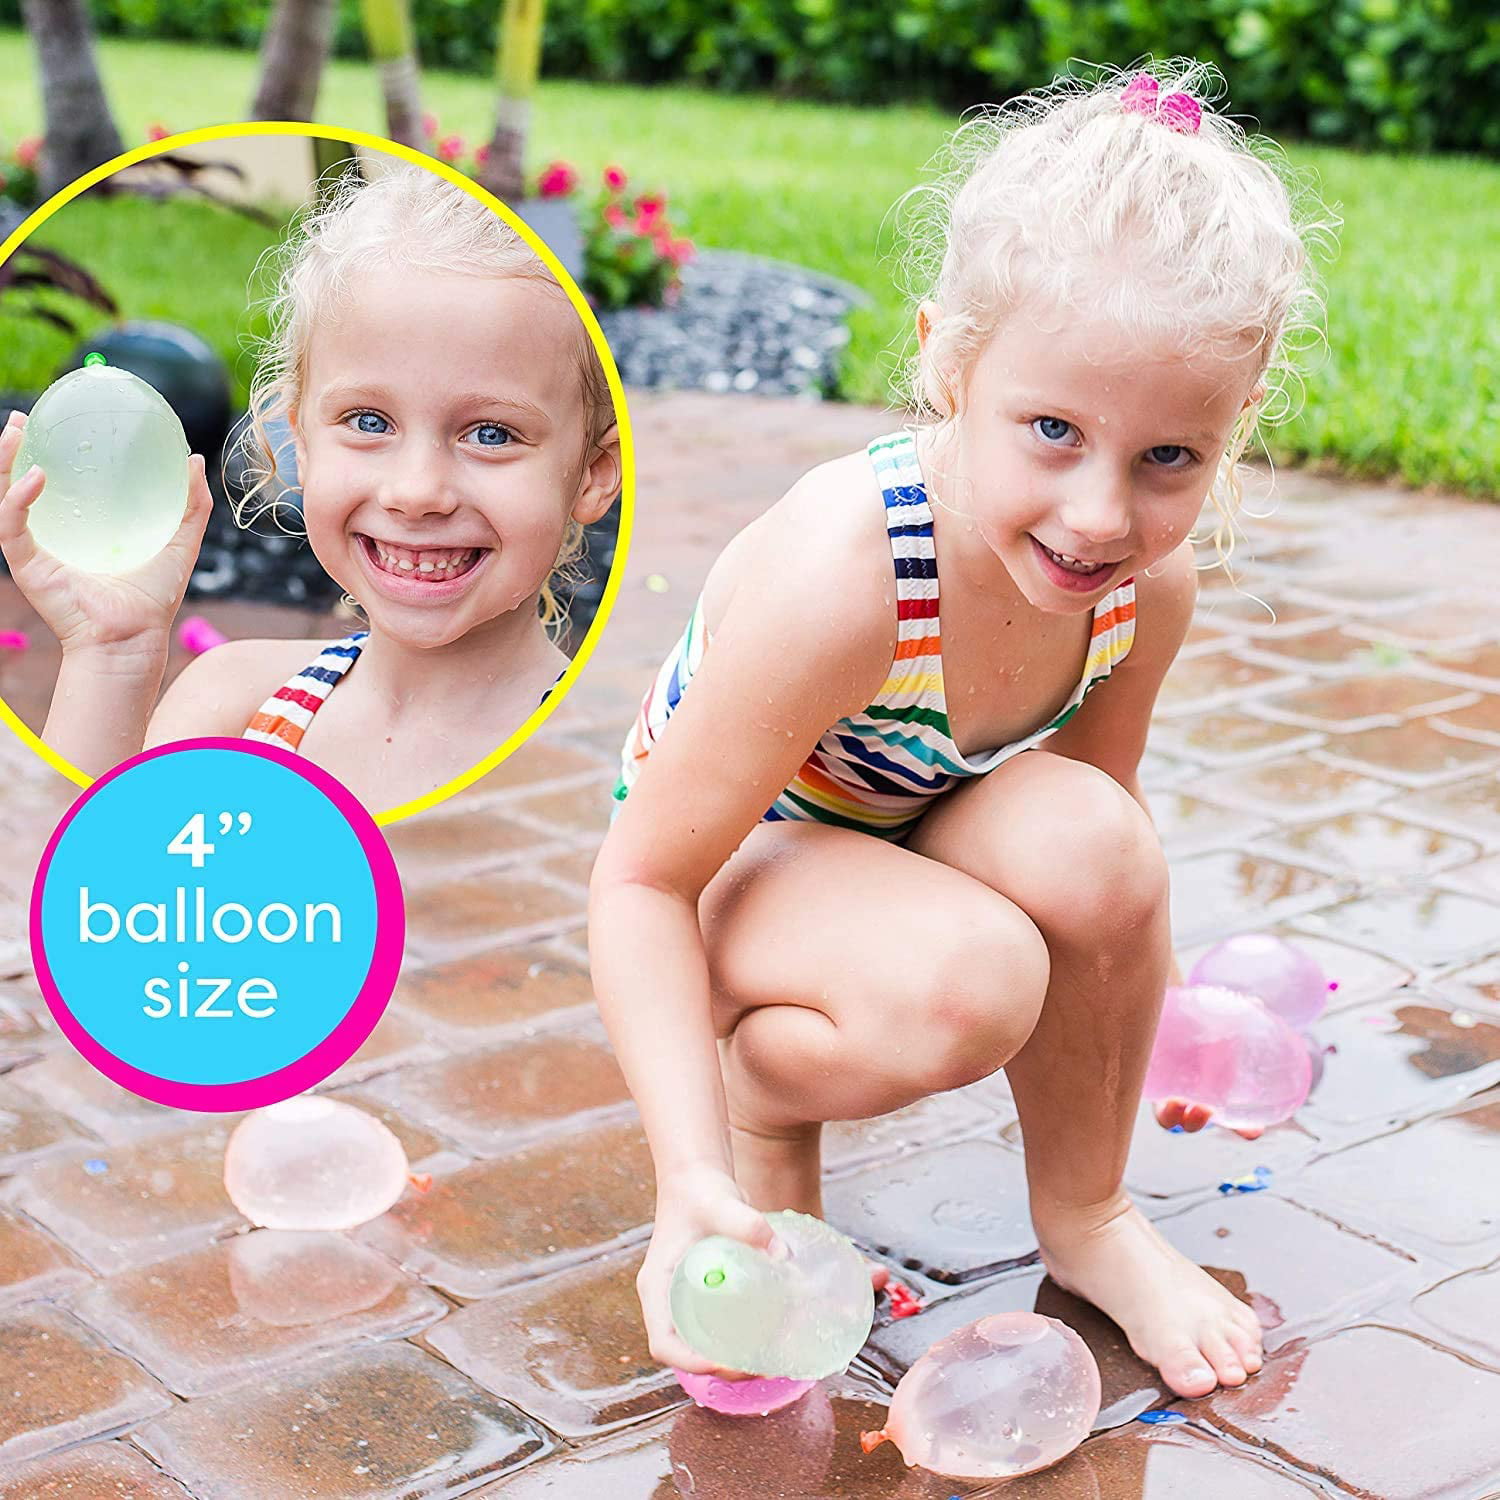 FEECHAGIER Water Balloons for Kids Girls Boys Balloons Set Party Games Quick Fill 592 Balloons for Swimming Pool Outdoor Summer Funs G1 